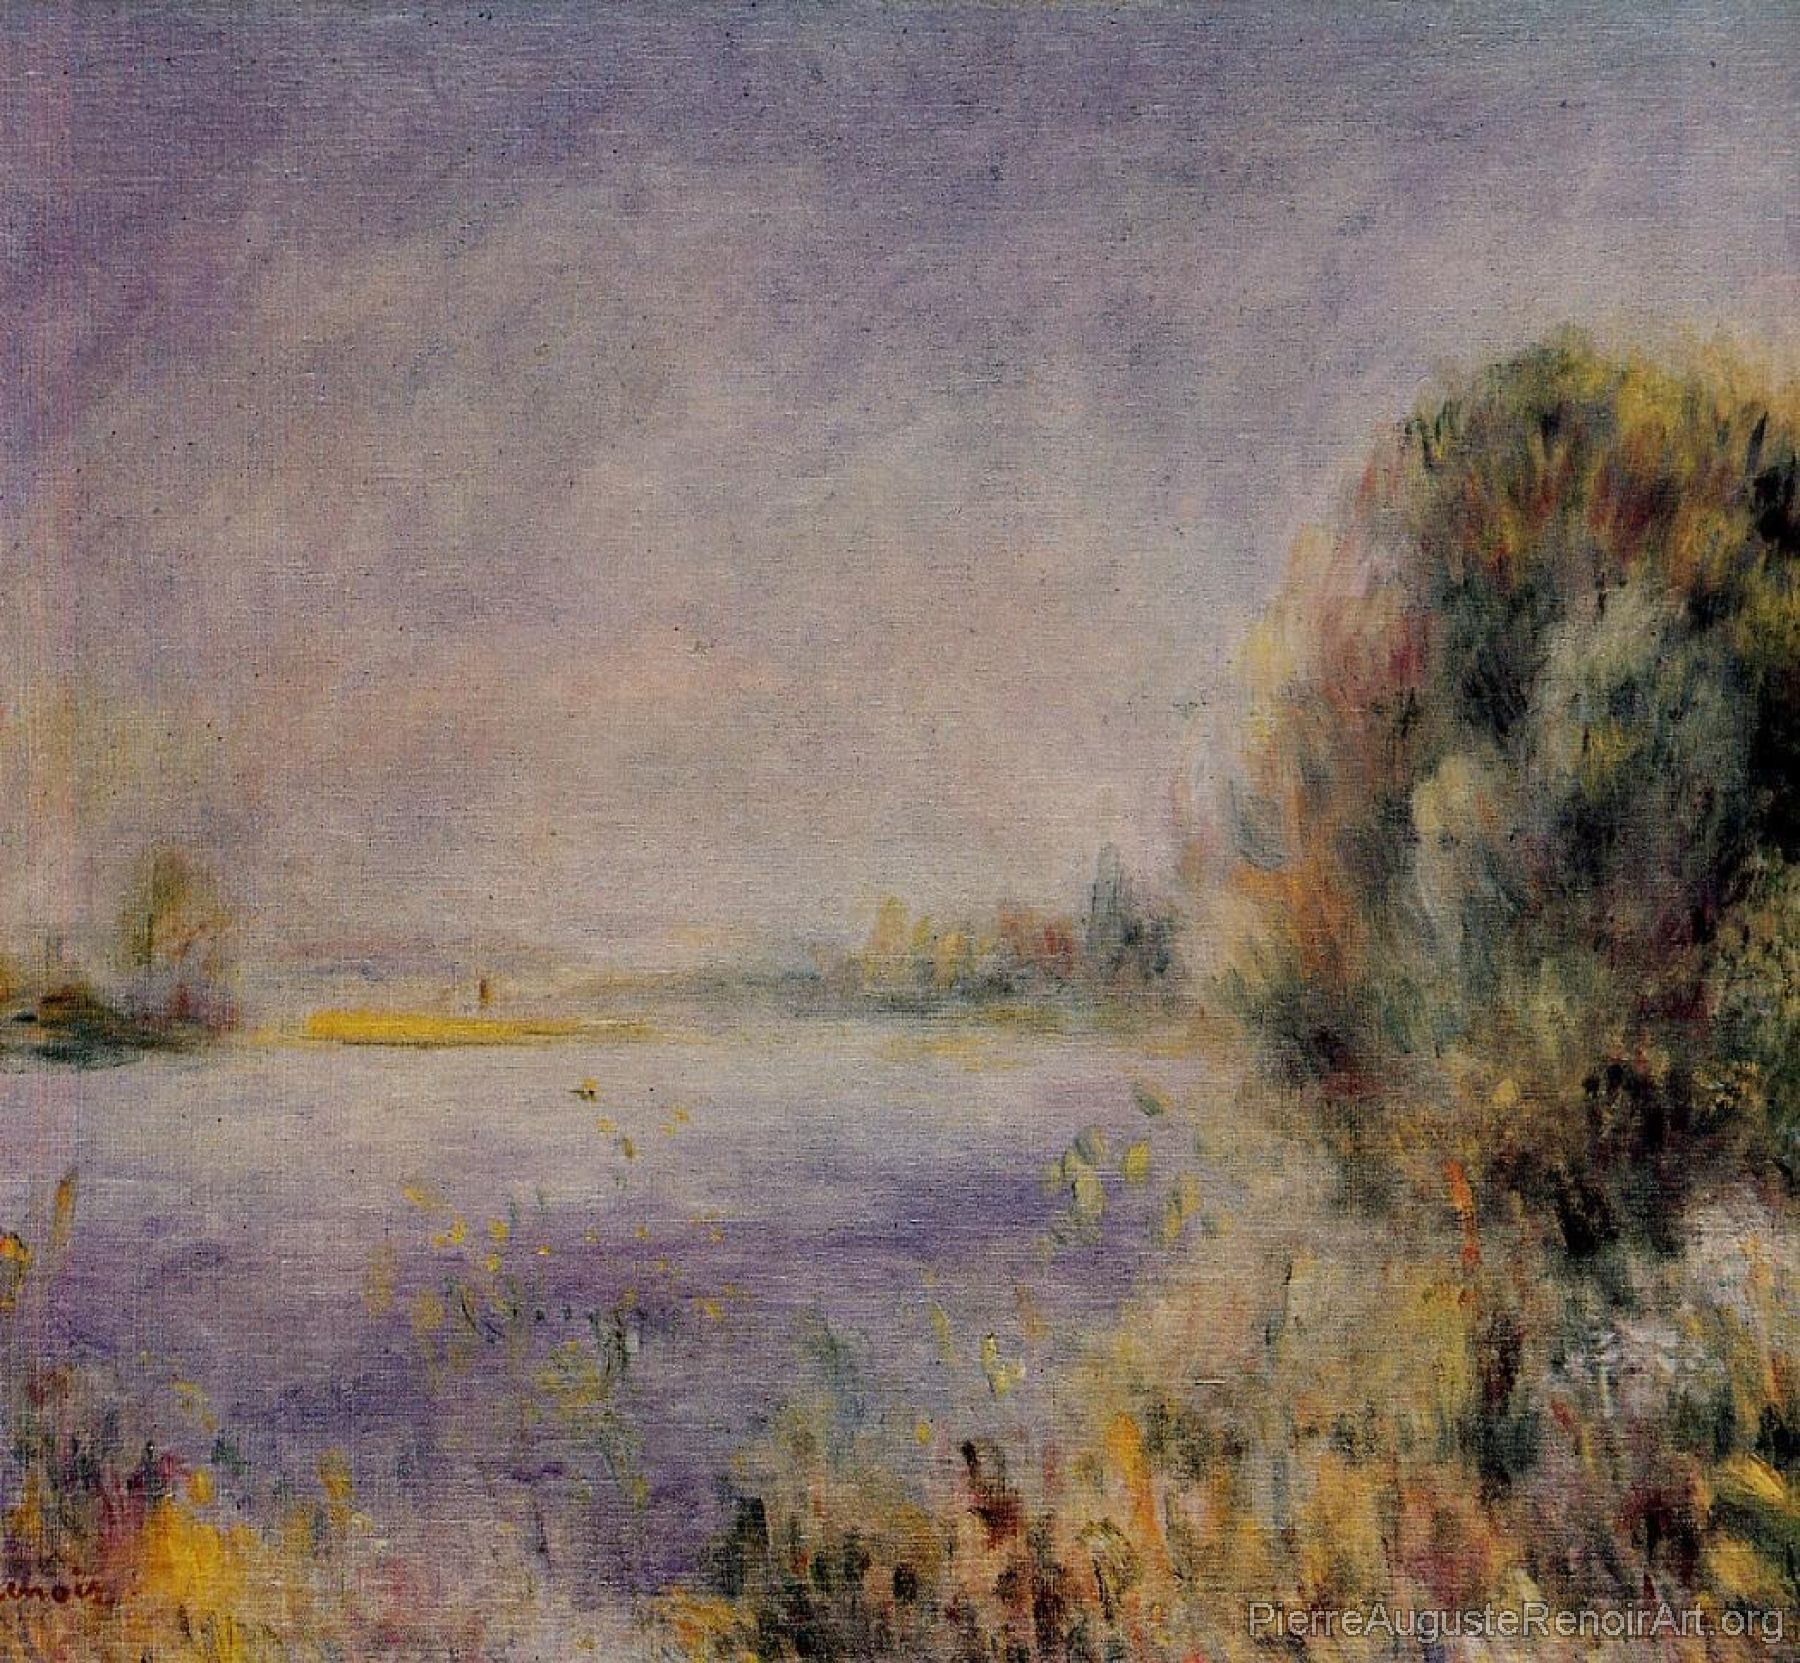 Banks of a River II